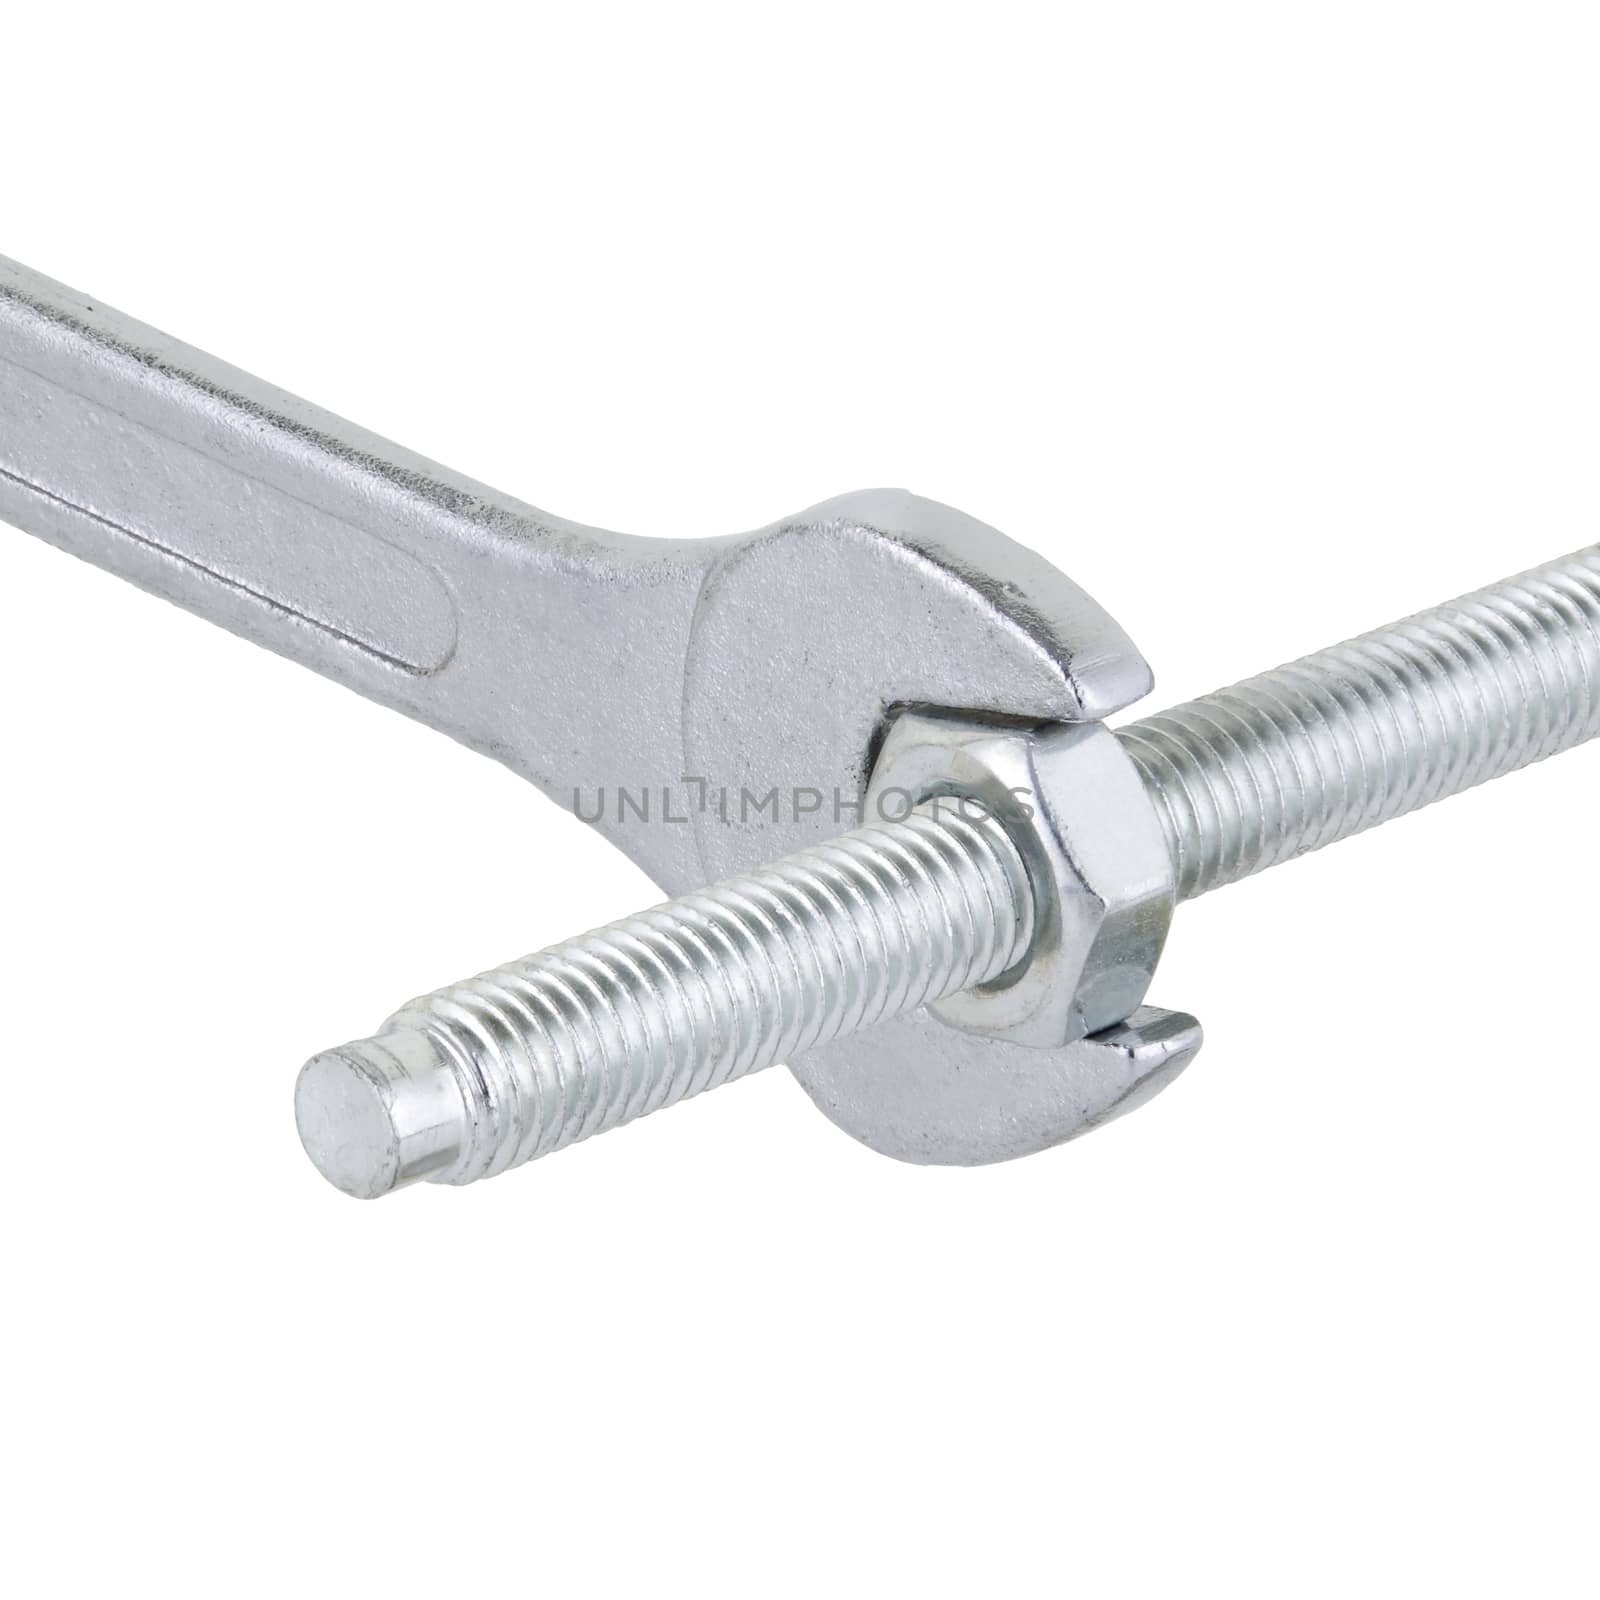 An open ended spanner wrench with nut and bolt